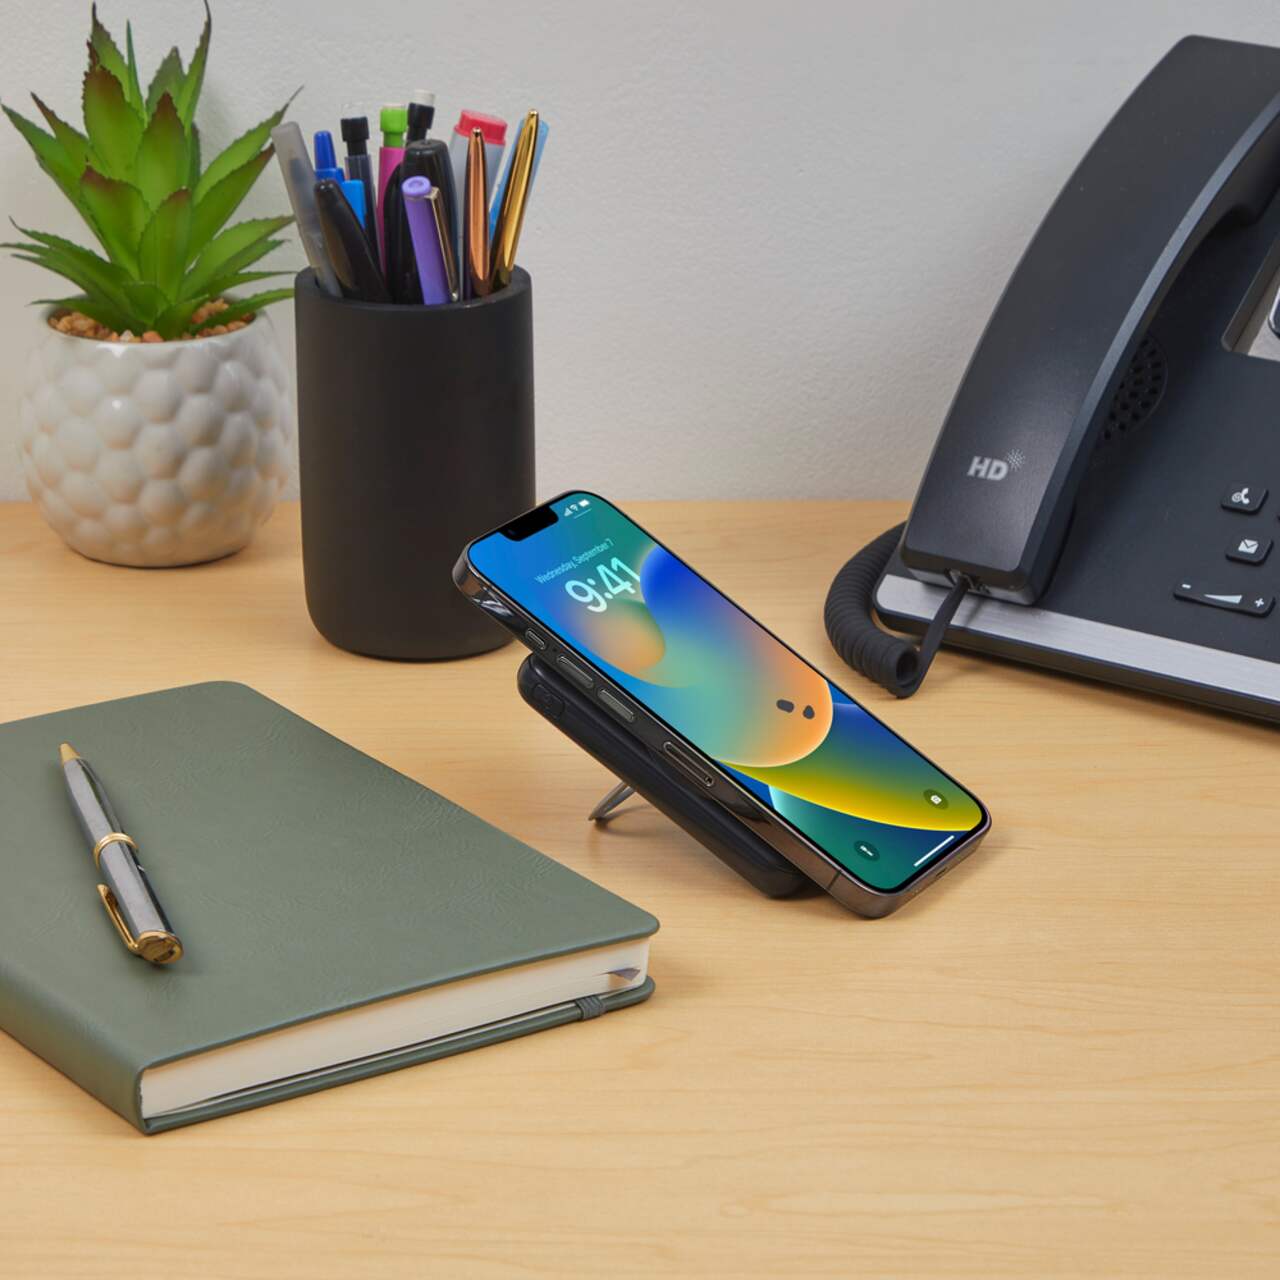 Bluehive Dual Coils Fabric Wireless Charging Pad